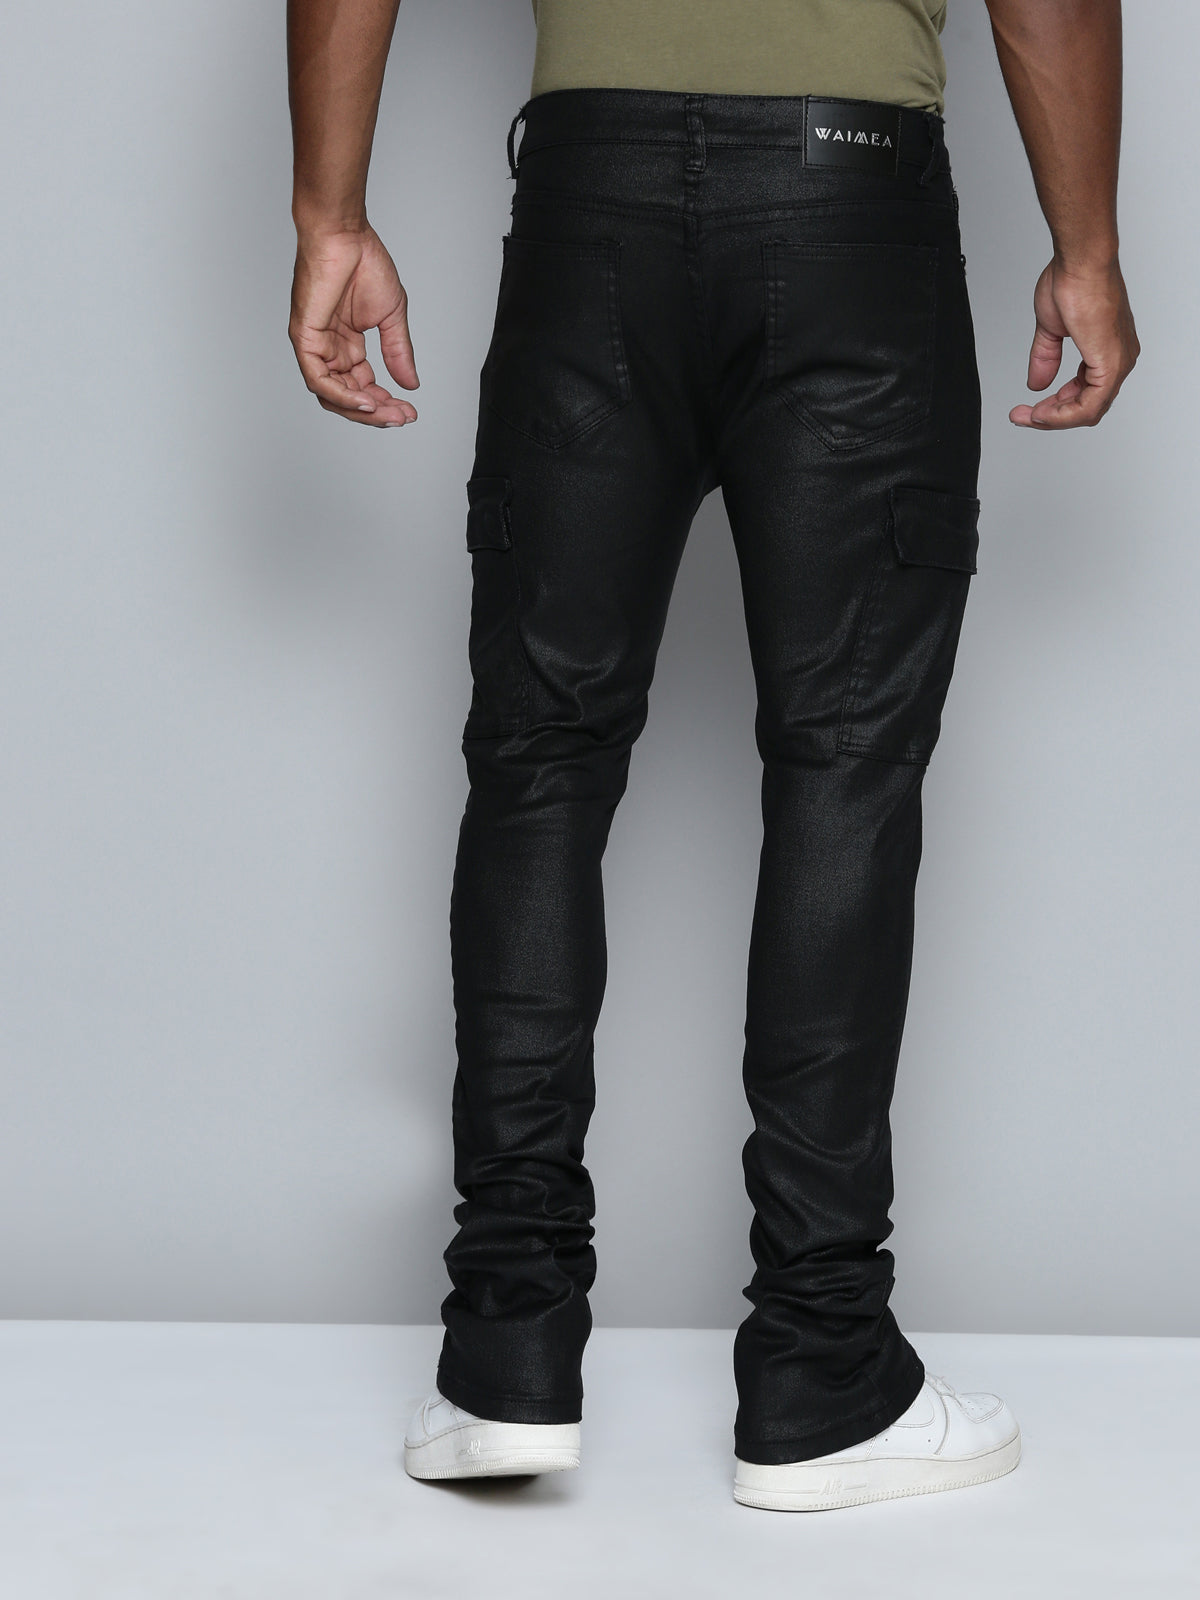 STACKED FIT JEANS – Waimea Online